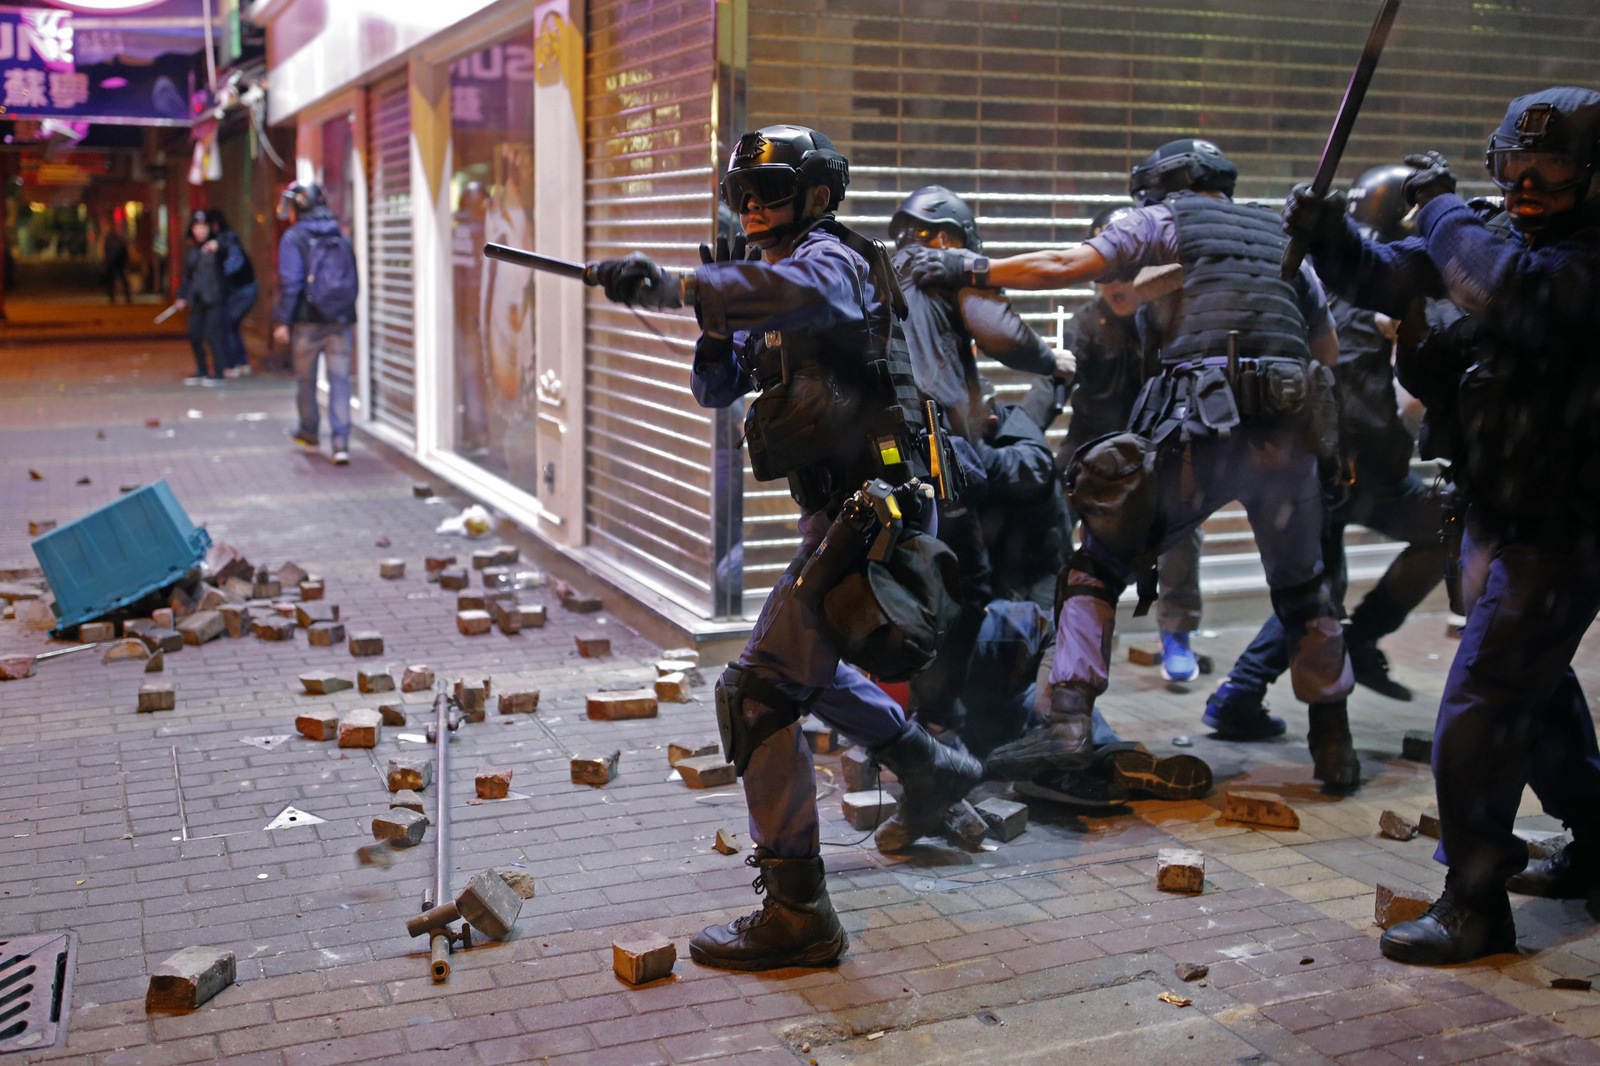 Riot police arrest a protester in Mong Kok district of Hong Kong, Tuesday, Feb. 9, 2016. (AP Photo/Vincent Yu)